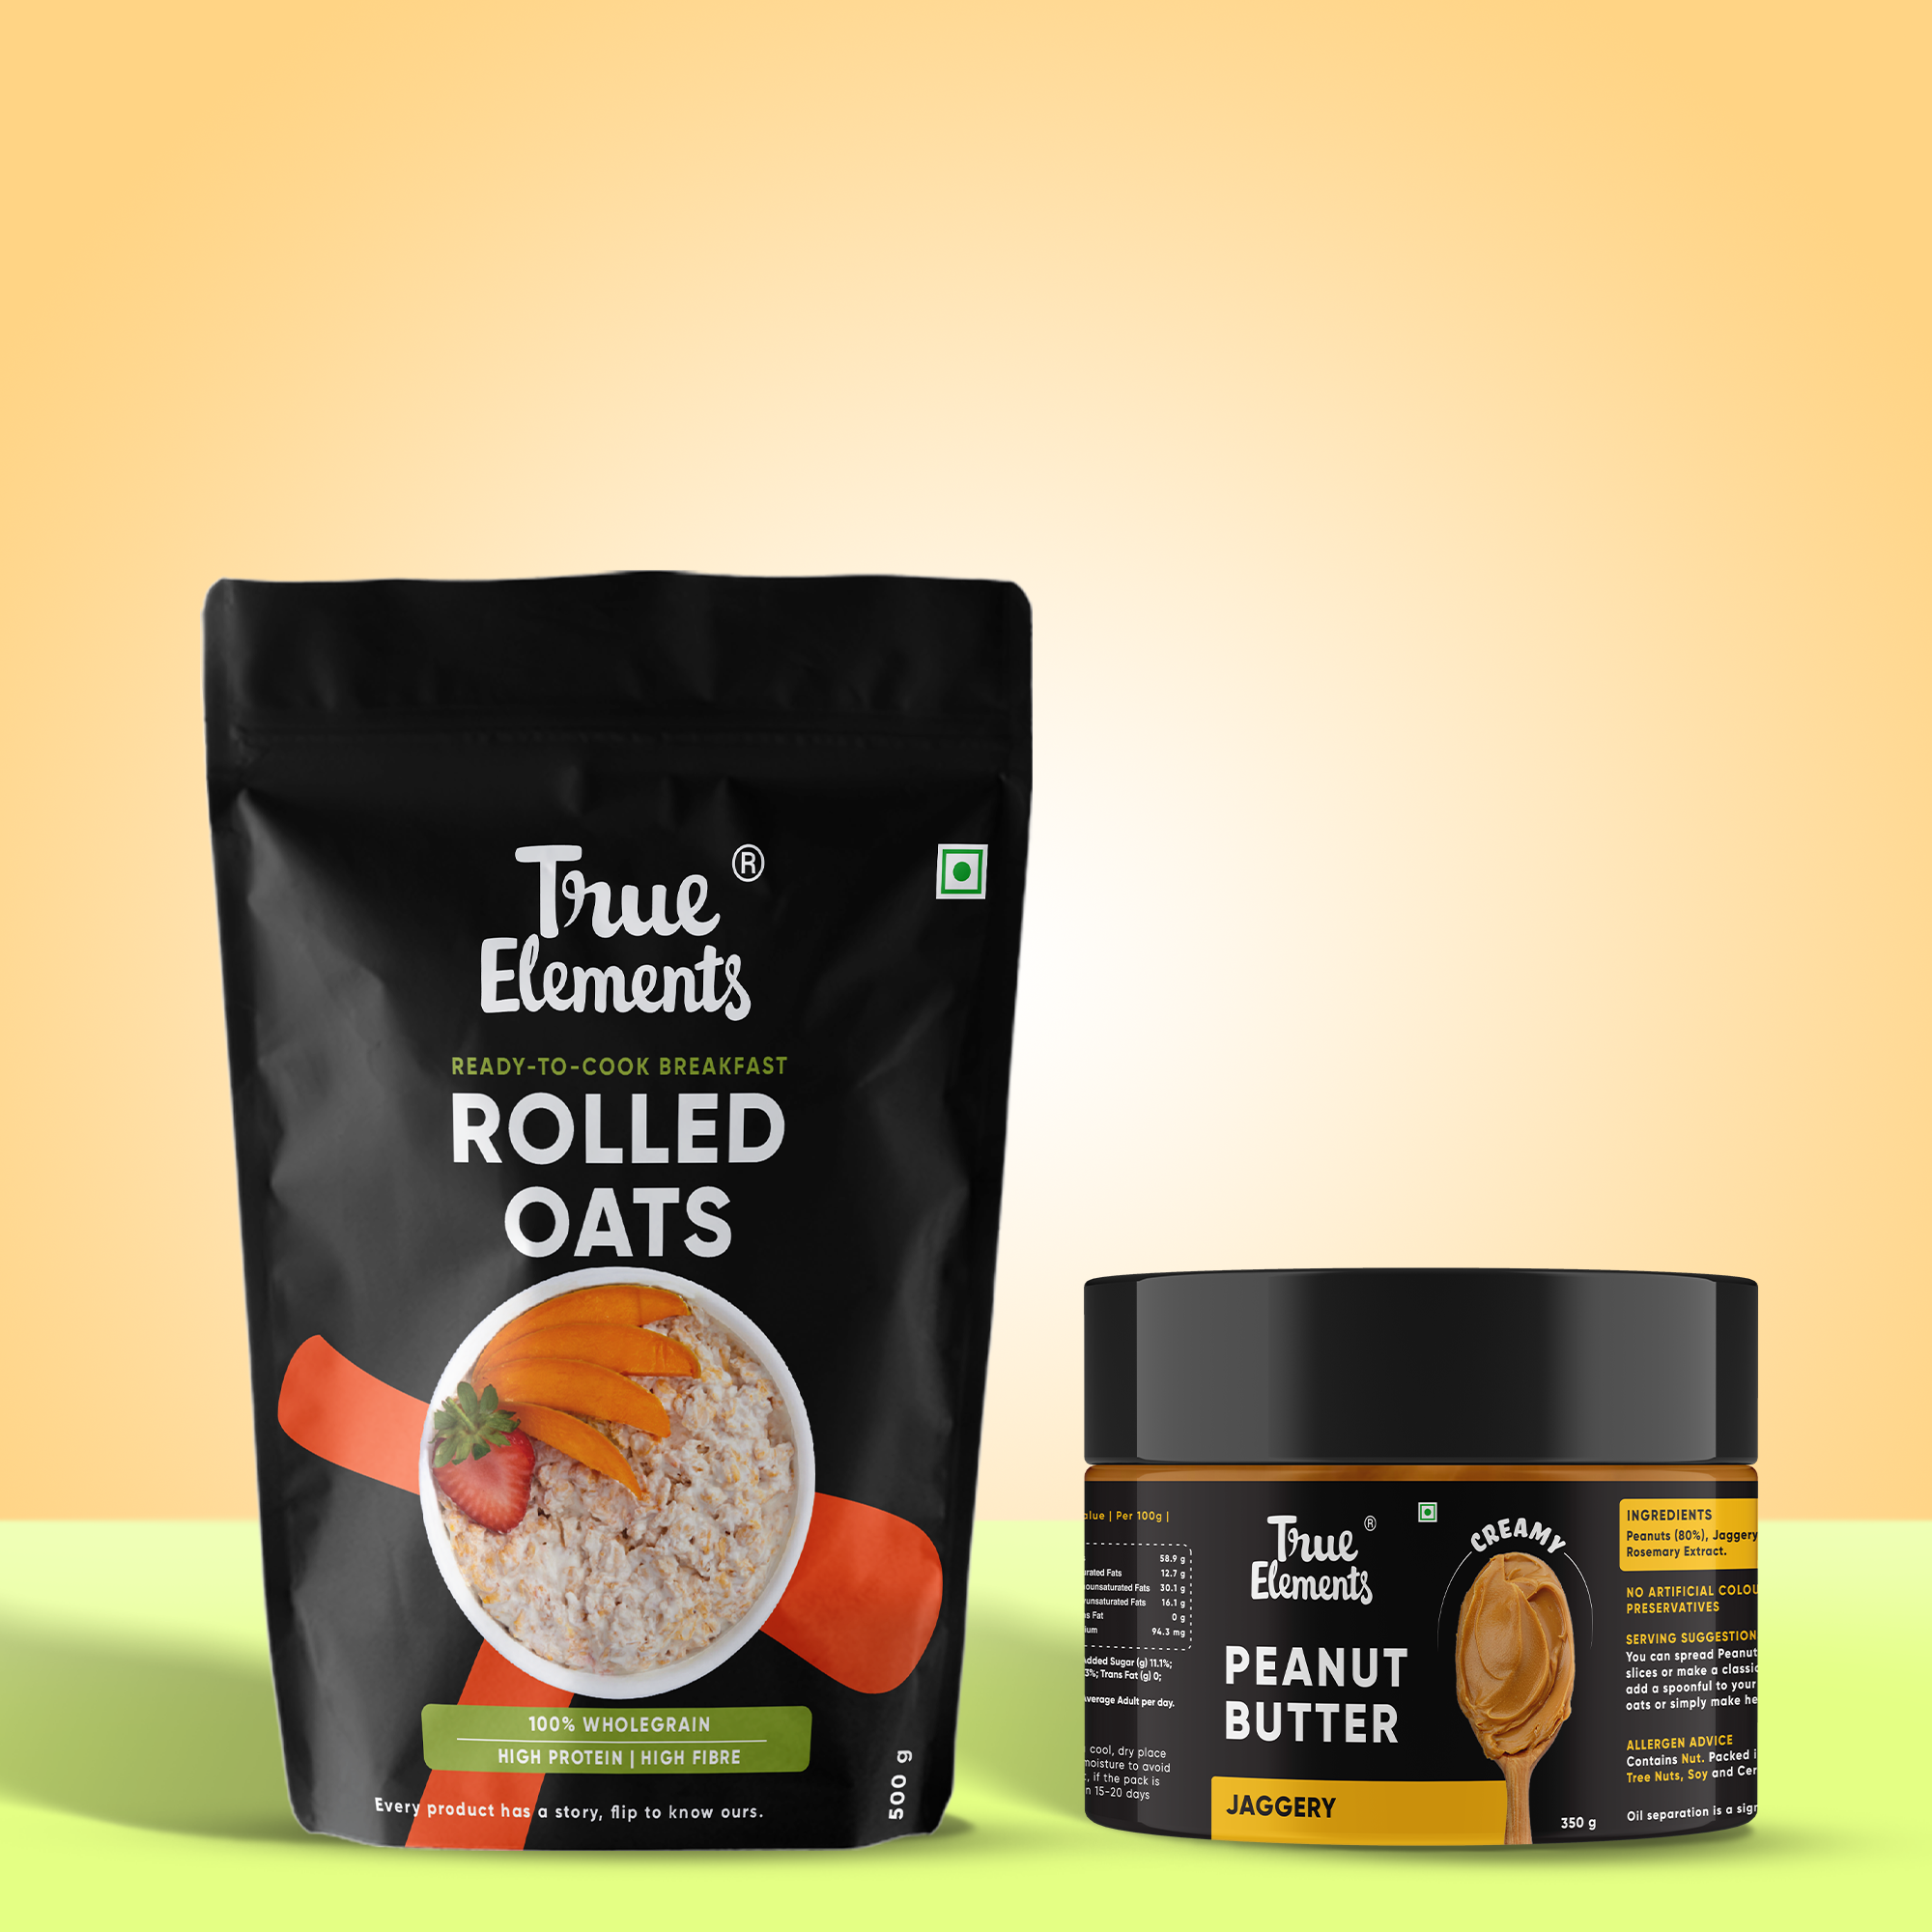 True Elements Rolled Oats 500g and Peanut Butter Jaggery Combo